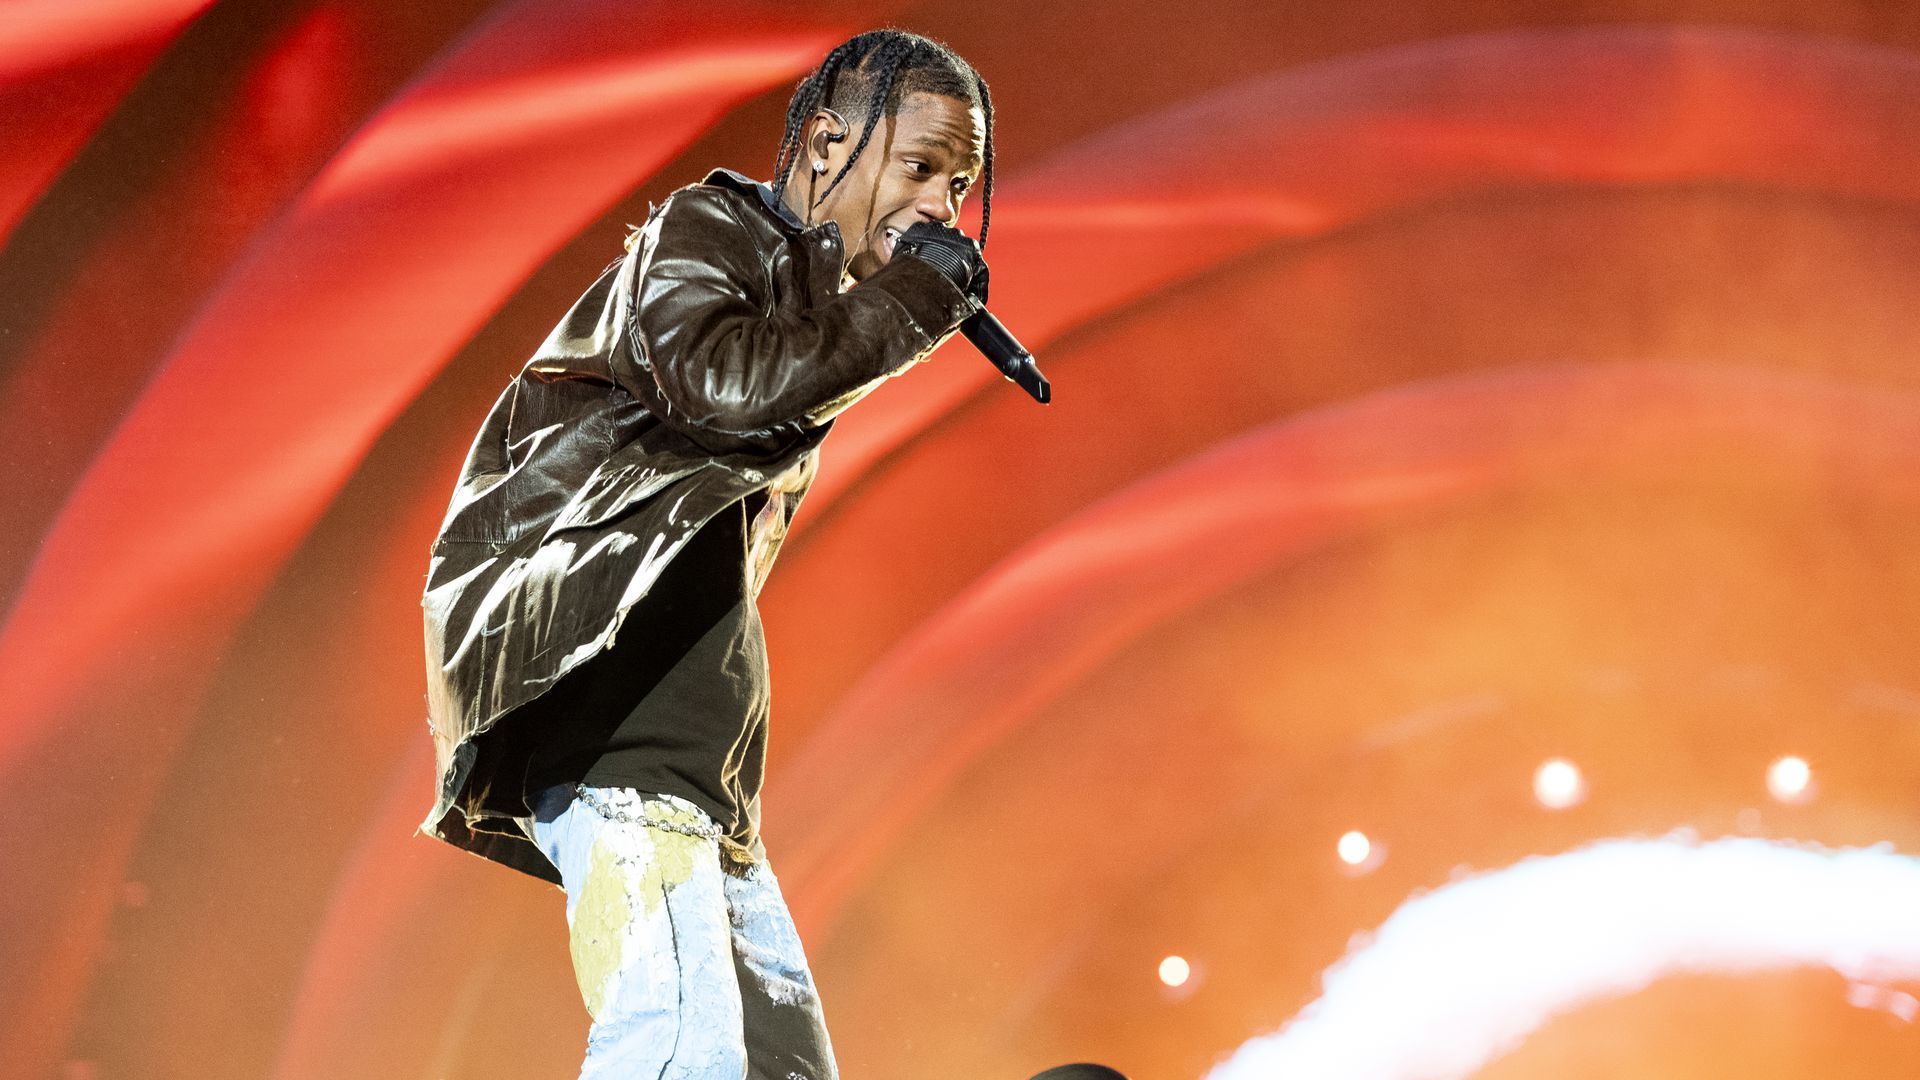 Travis Scott performs at the 2021 Astroworld Festival in Houston, Texas.